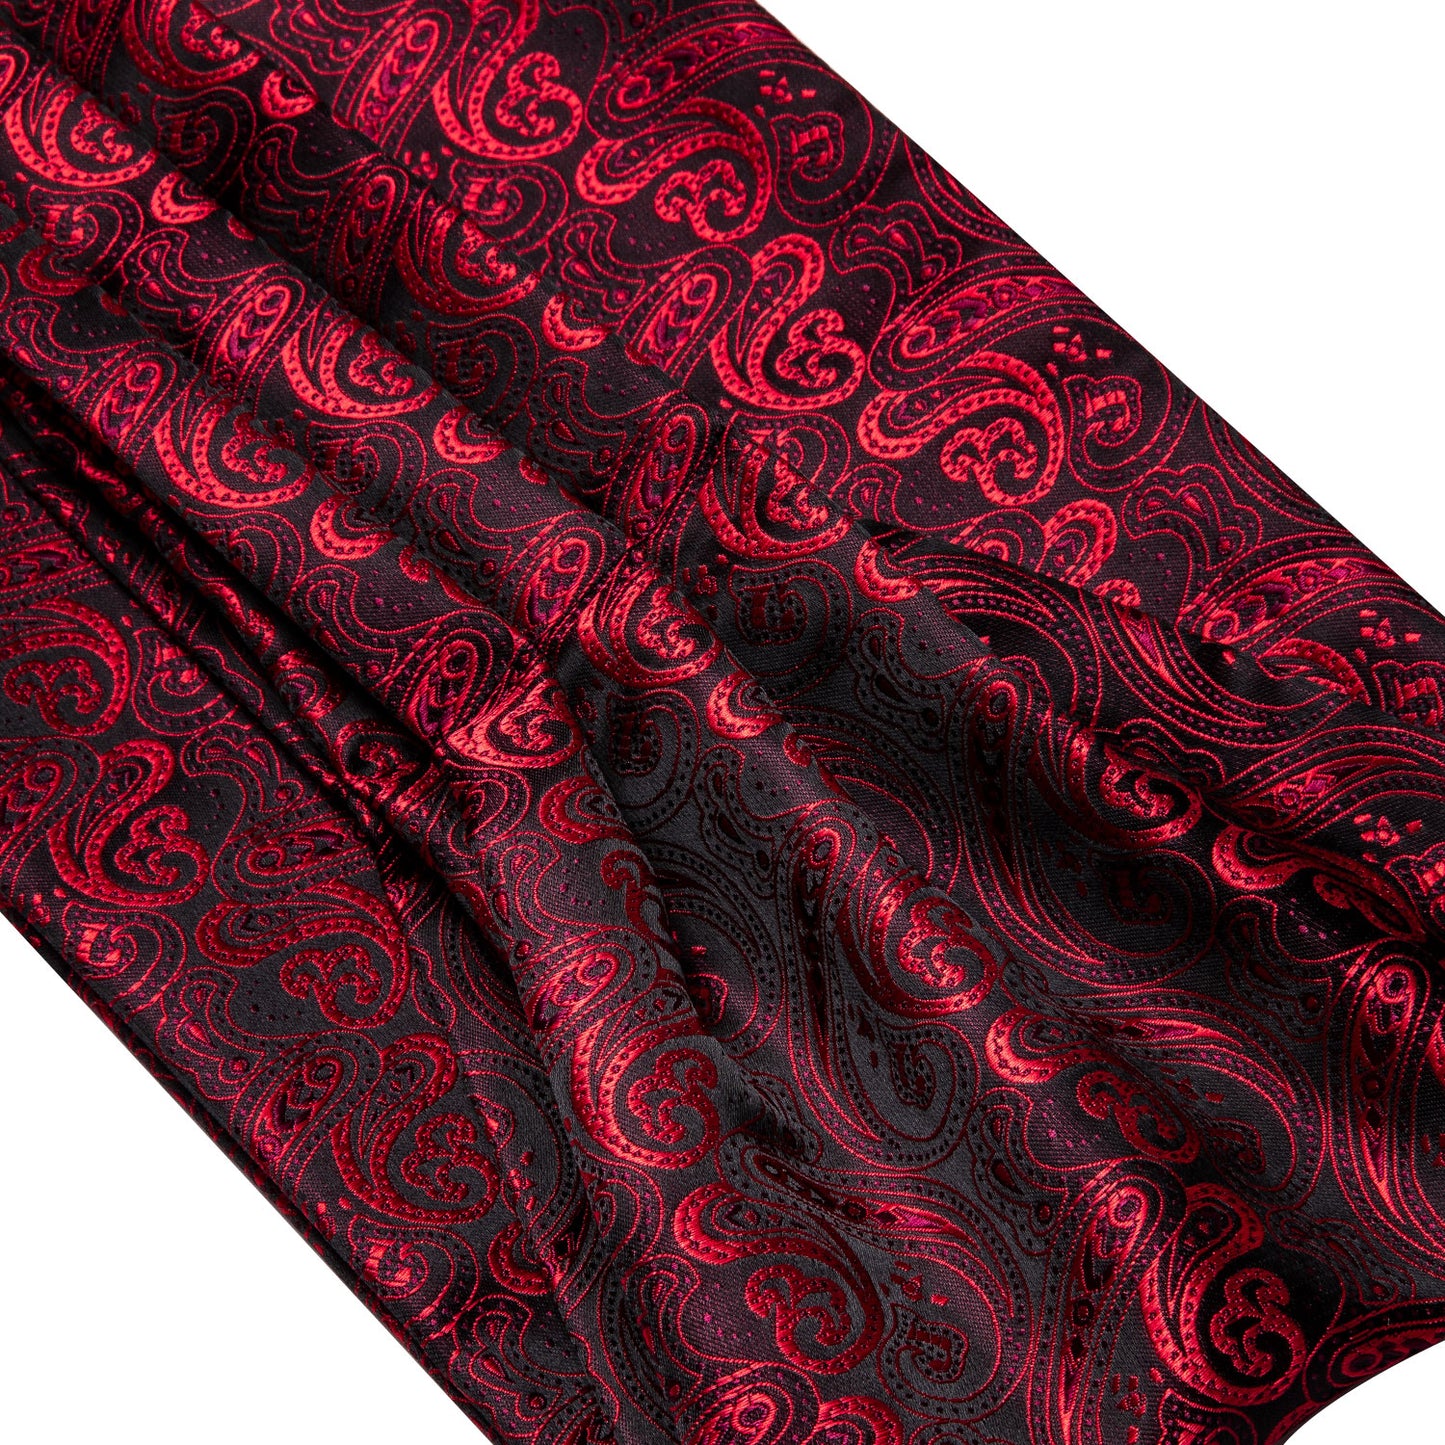 Victorian Ascot Silky Floral Day Cravat Set [Maroon Paisley]